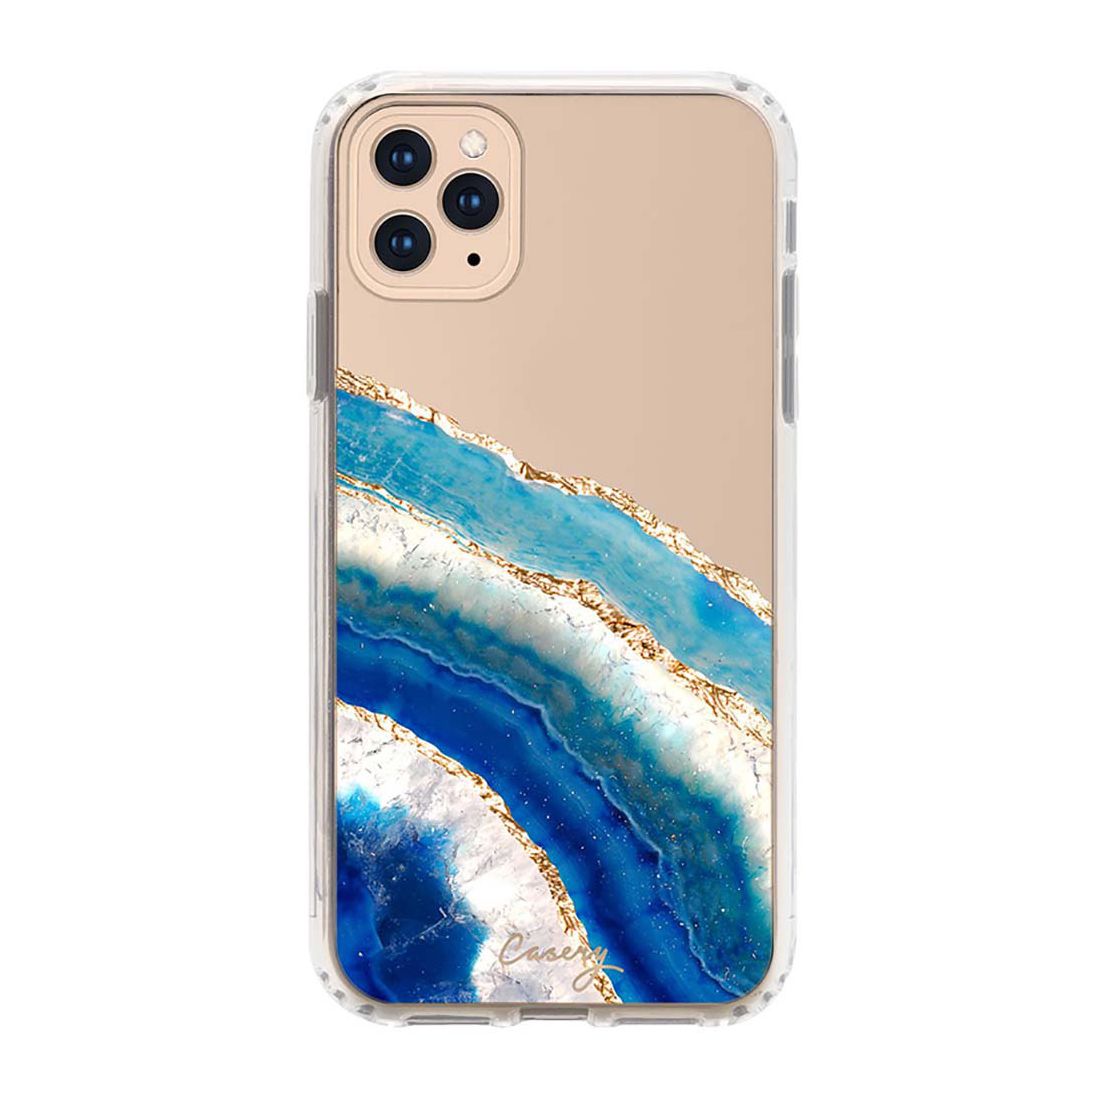 Casery Siren Case for iPhone 12 Pro /12